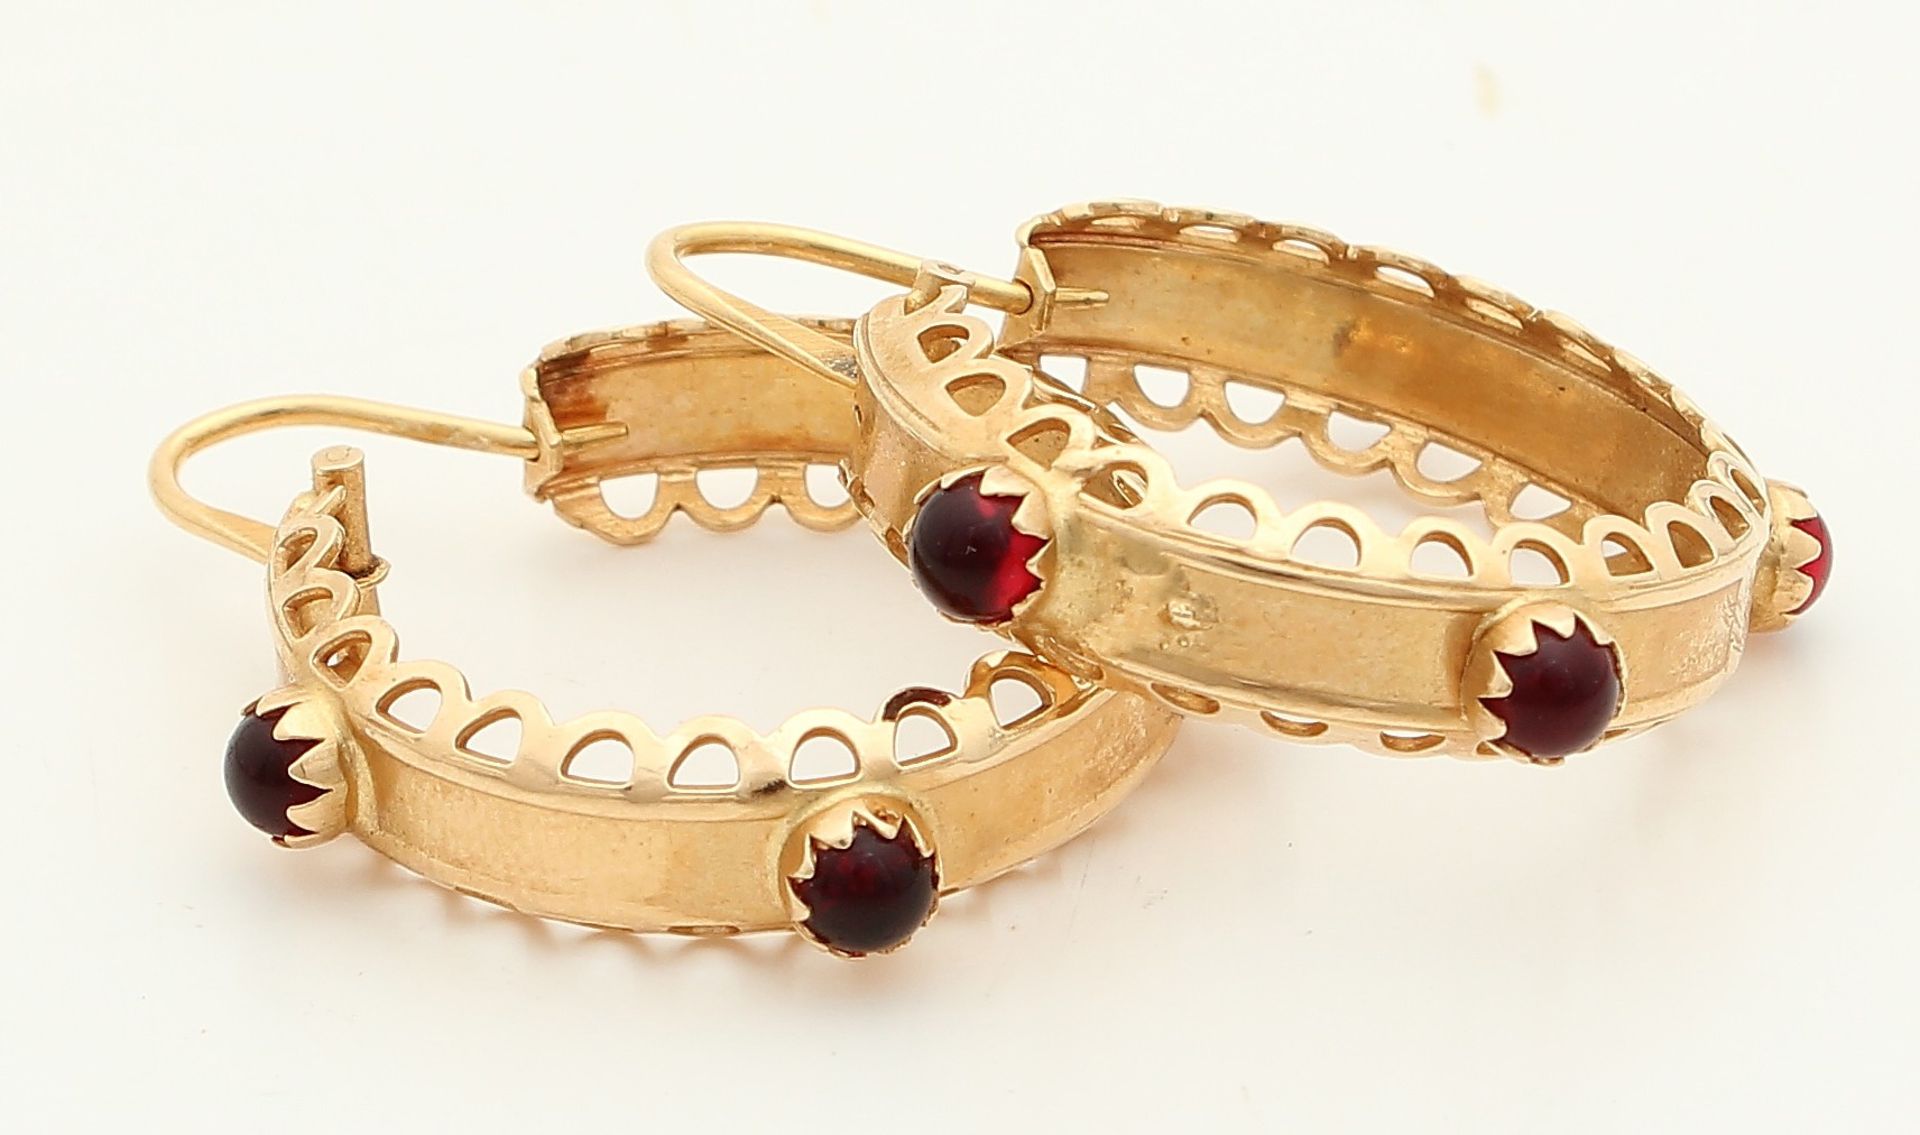 Large gold hoops, 750/000, with grenades. Hoops adorned with a scalloped edge with four round